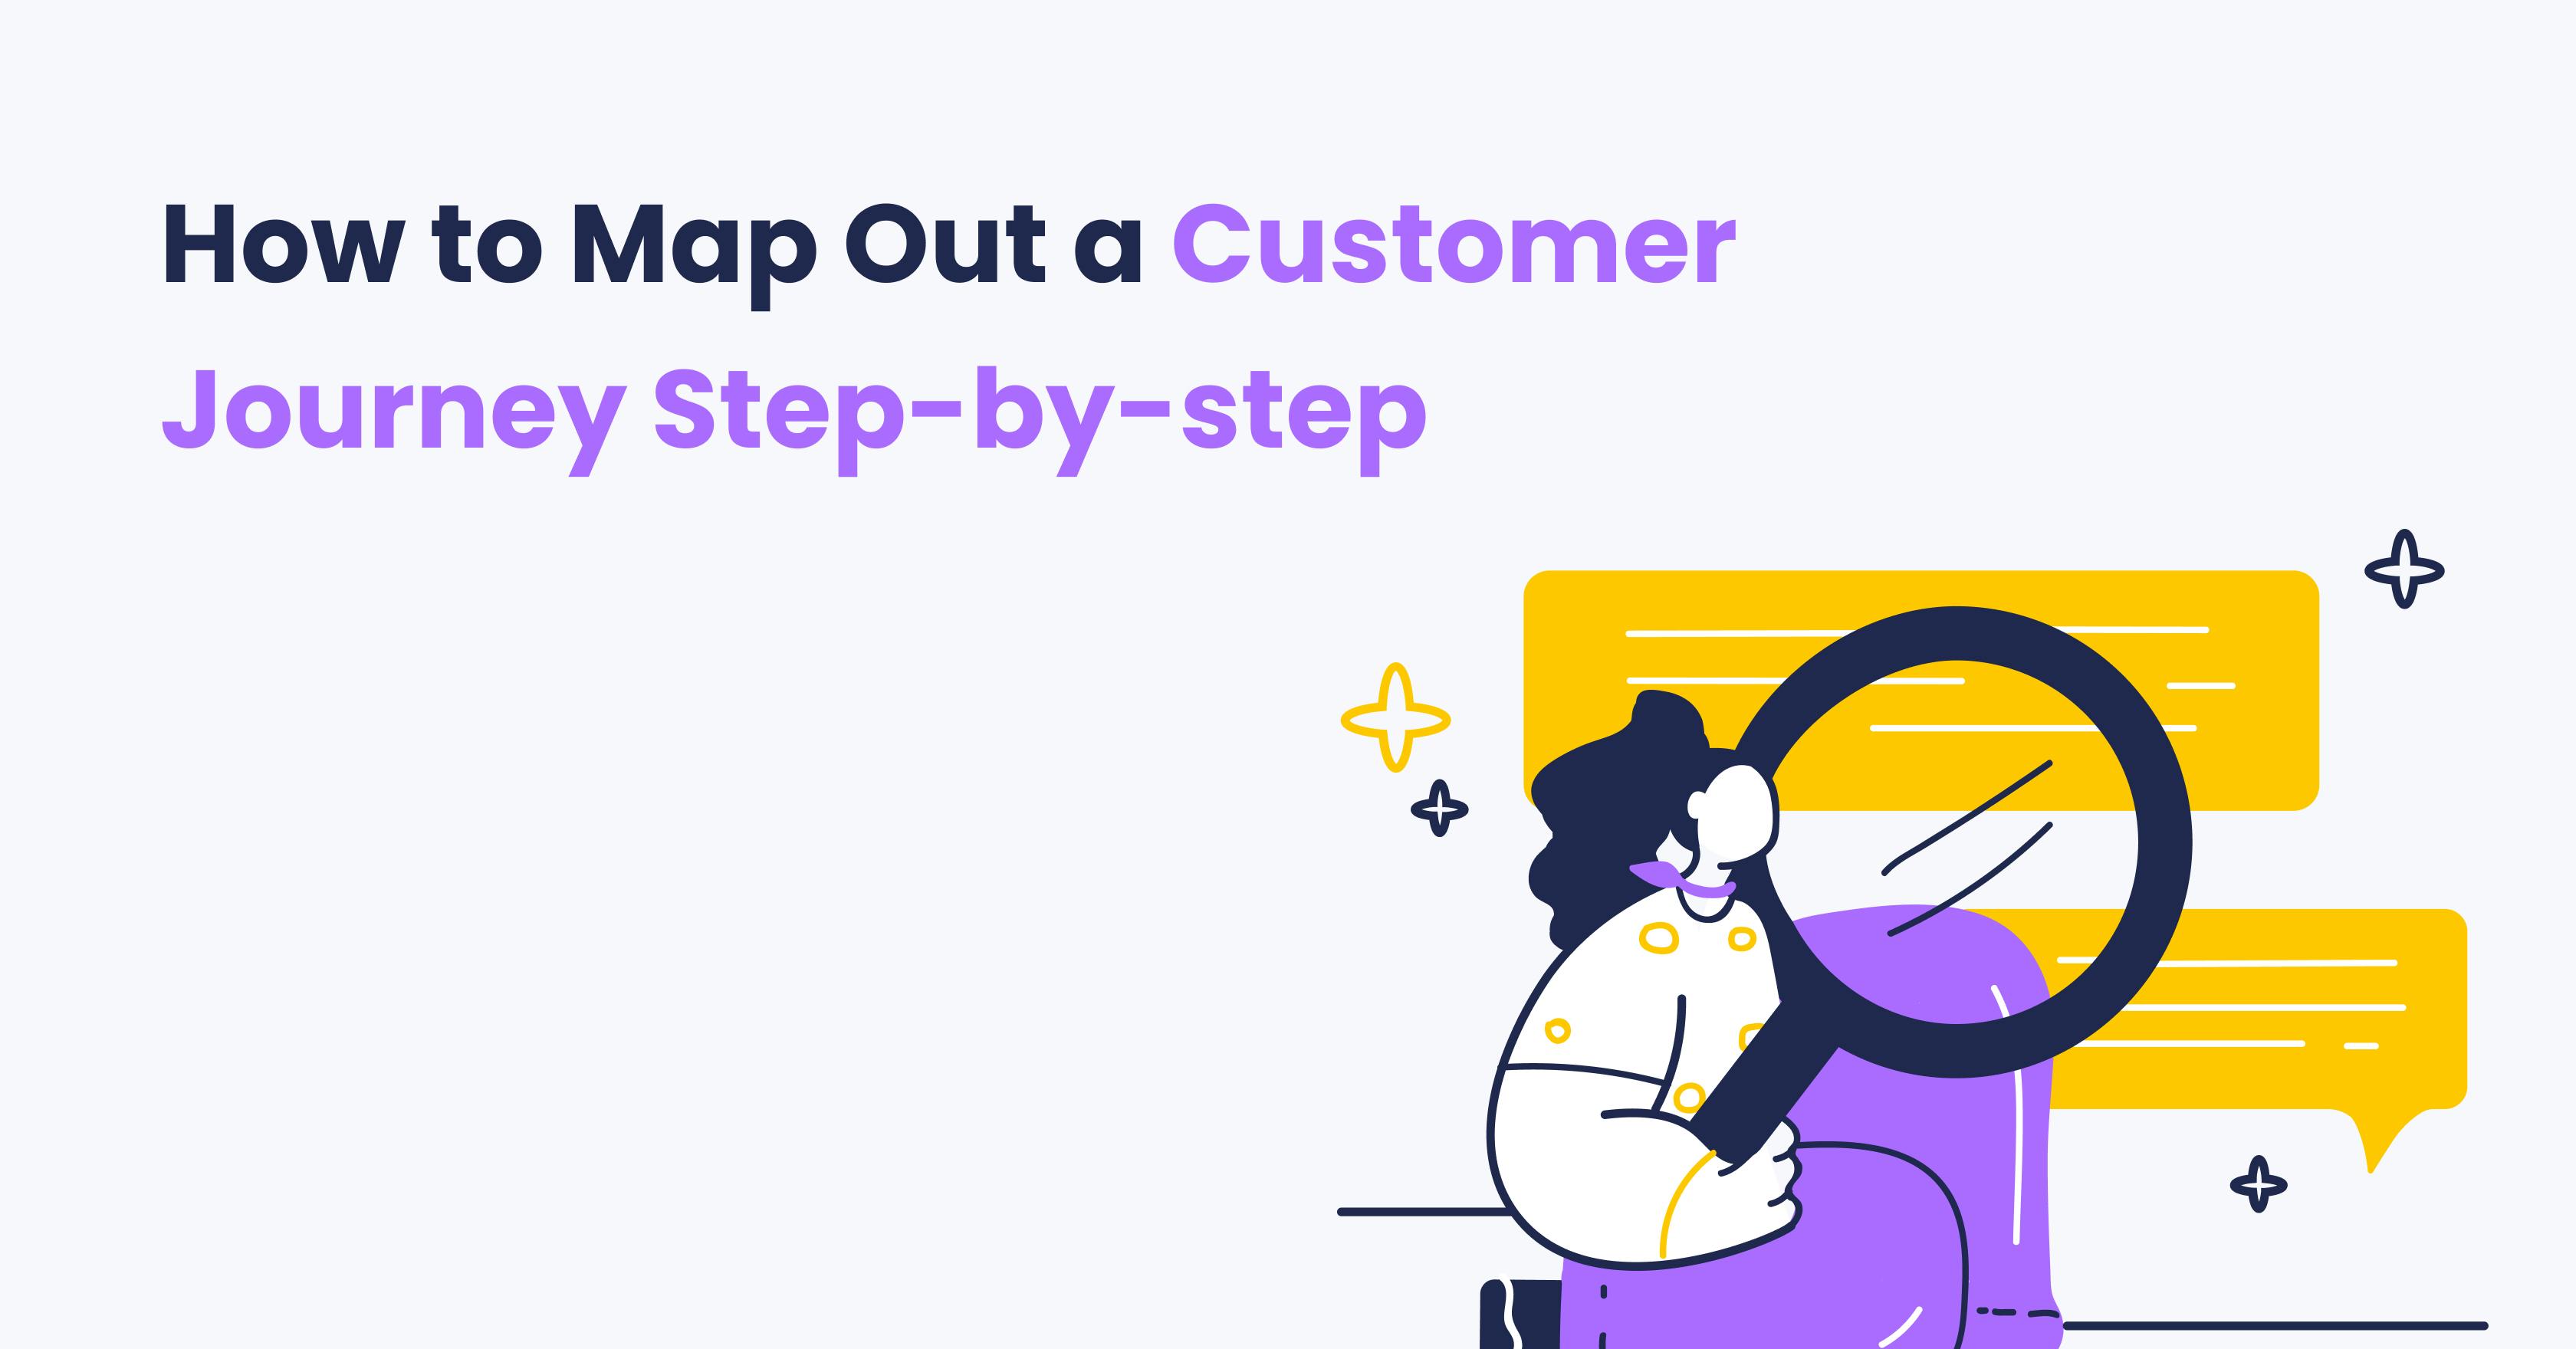 Nightborn - How to map out a customer journey step-by-step